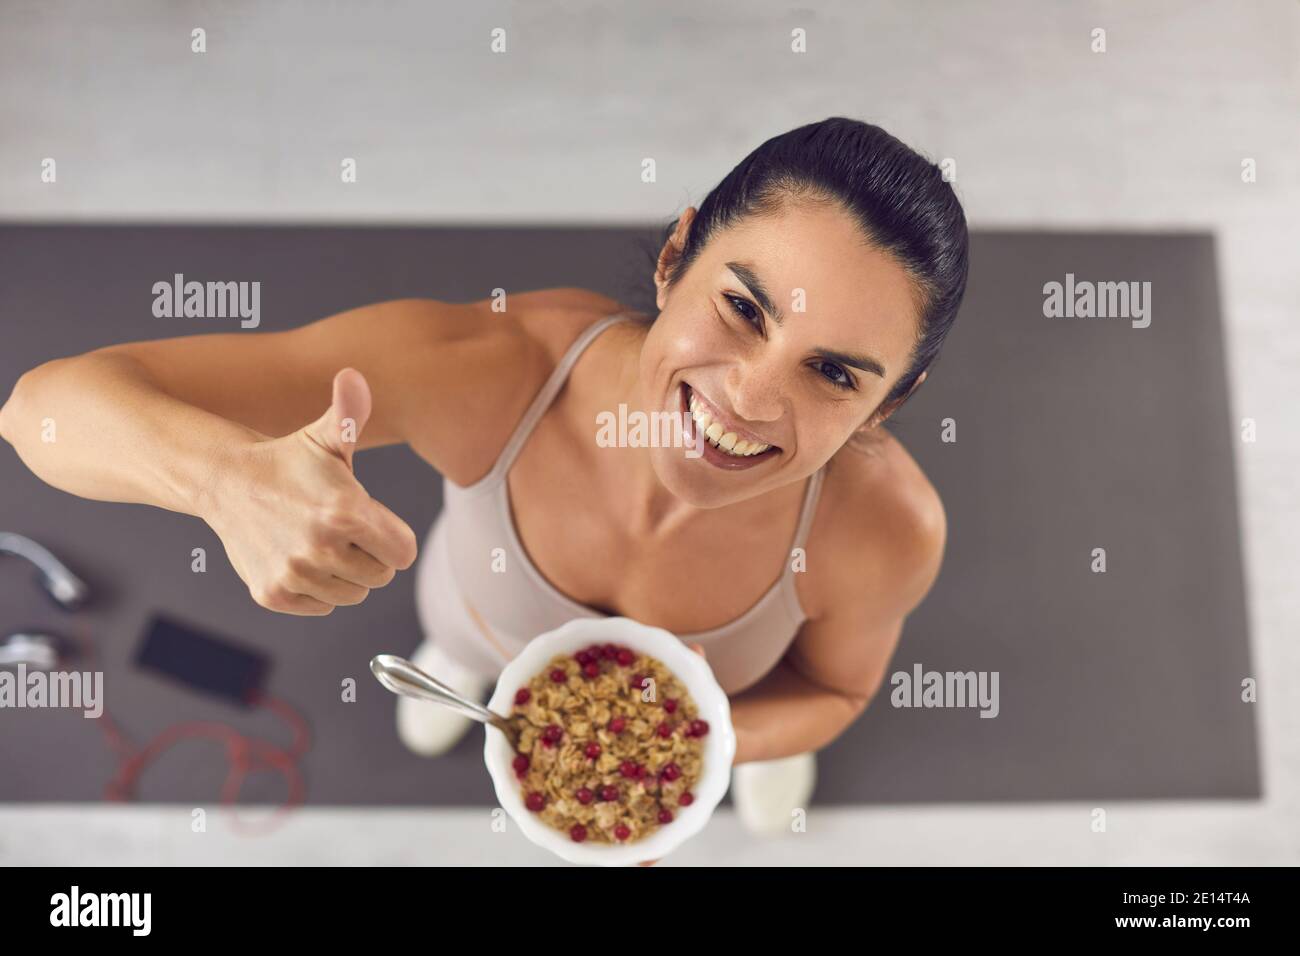 Positive woman athlete in sportswear holding bowl of grain cereal healthy meal Stock Photo